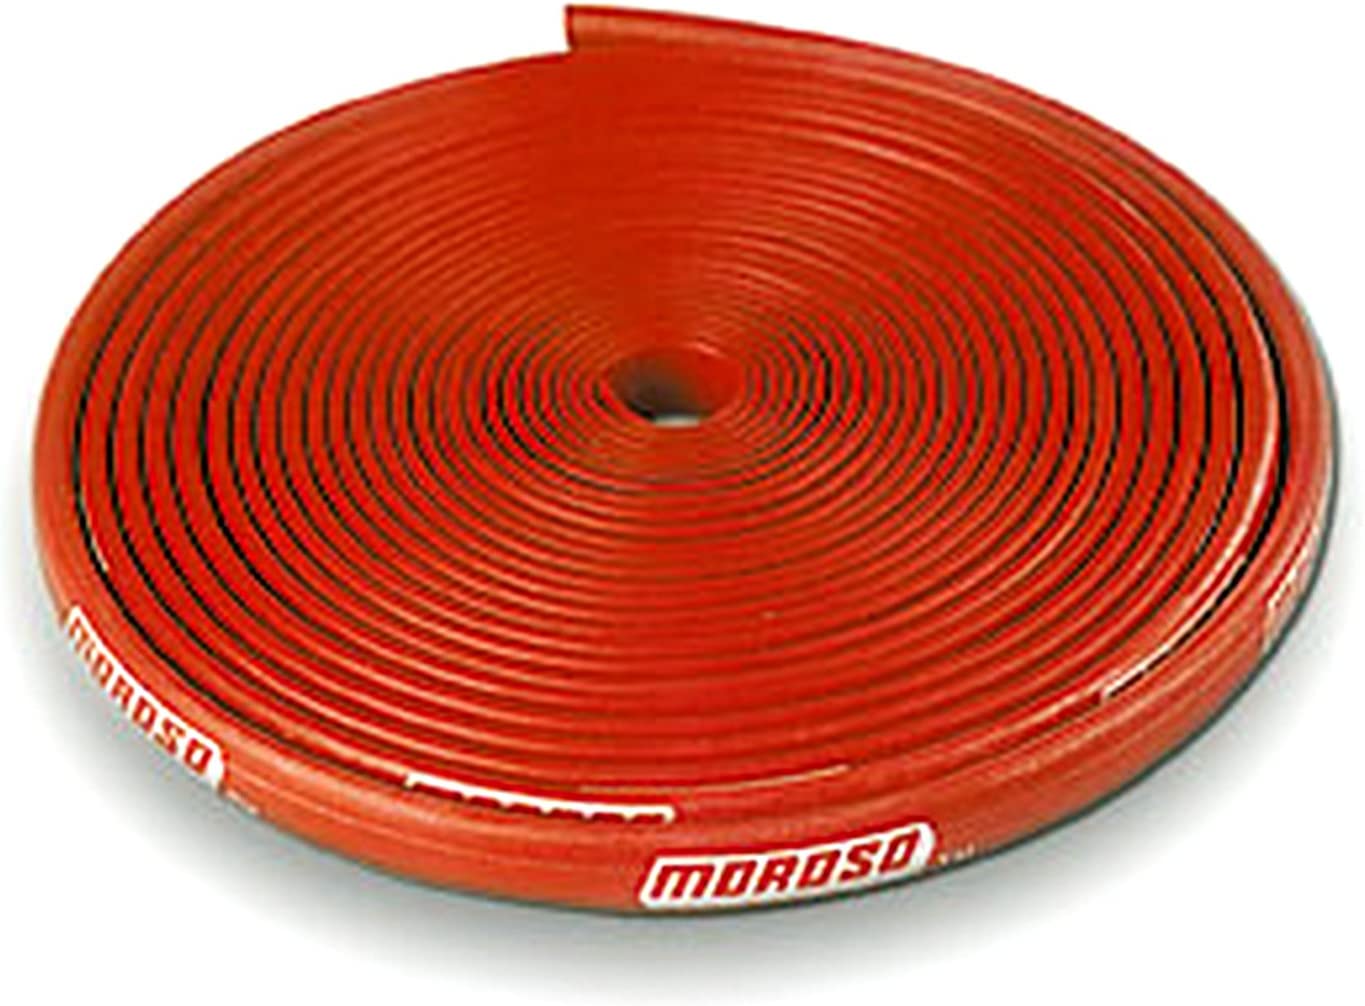 Moroso 72002 Insulated Spark Plug Wire Sleeve (Red, 8mm)